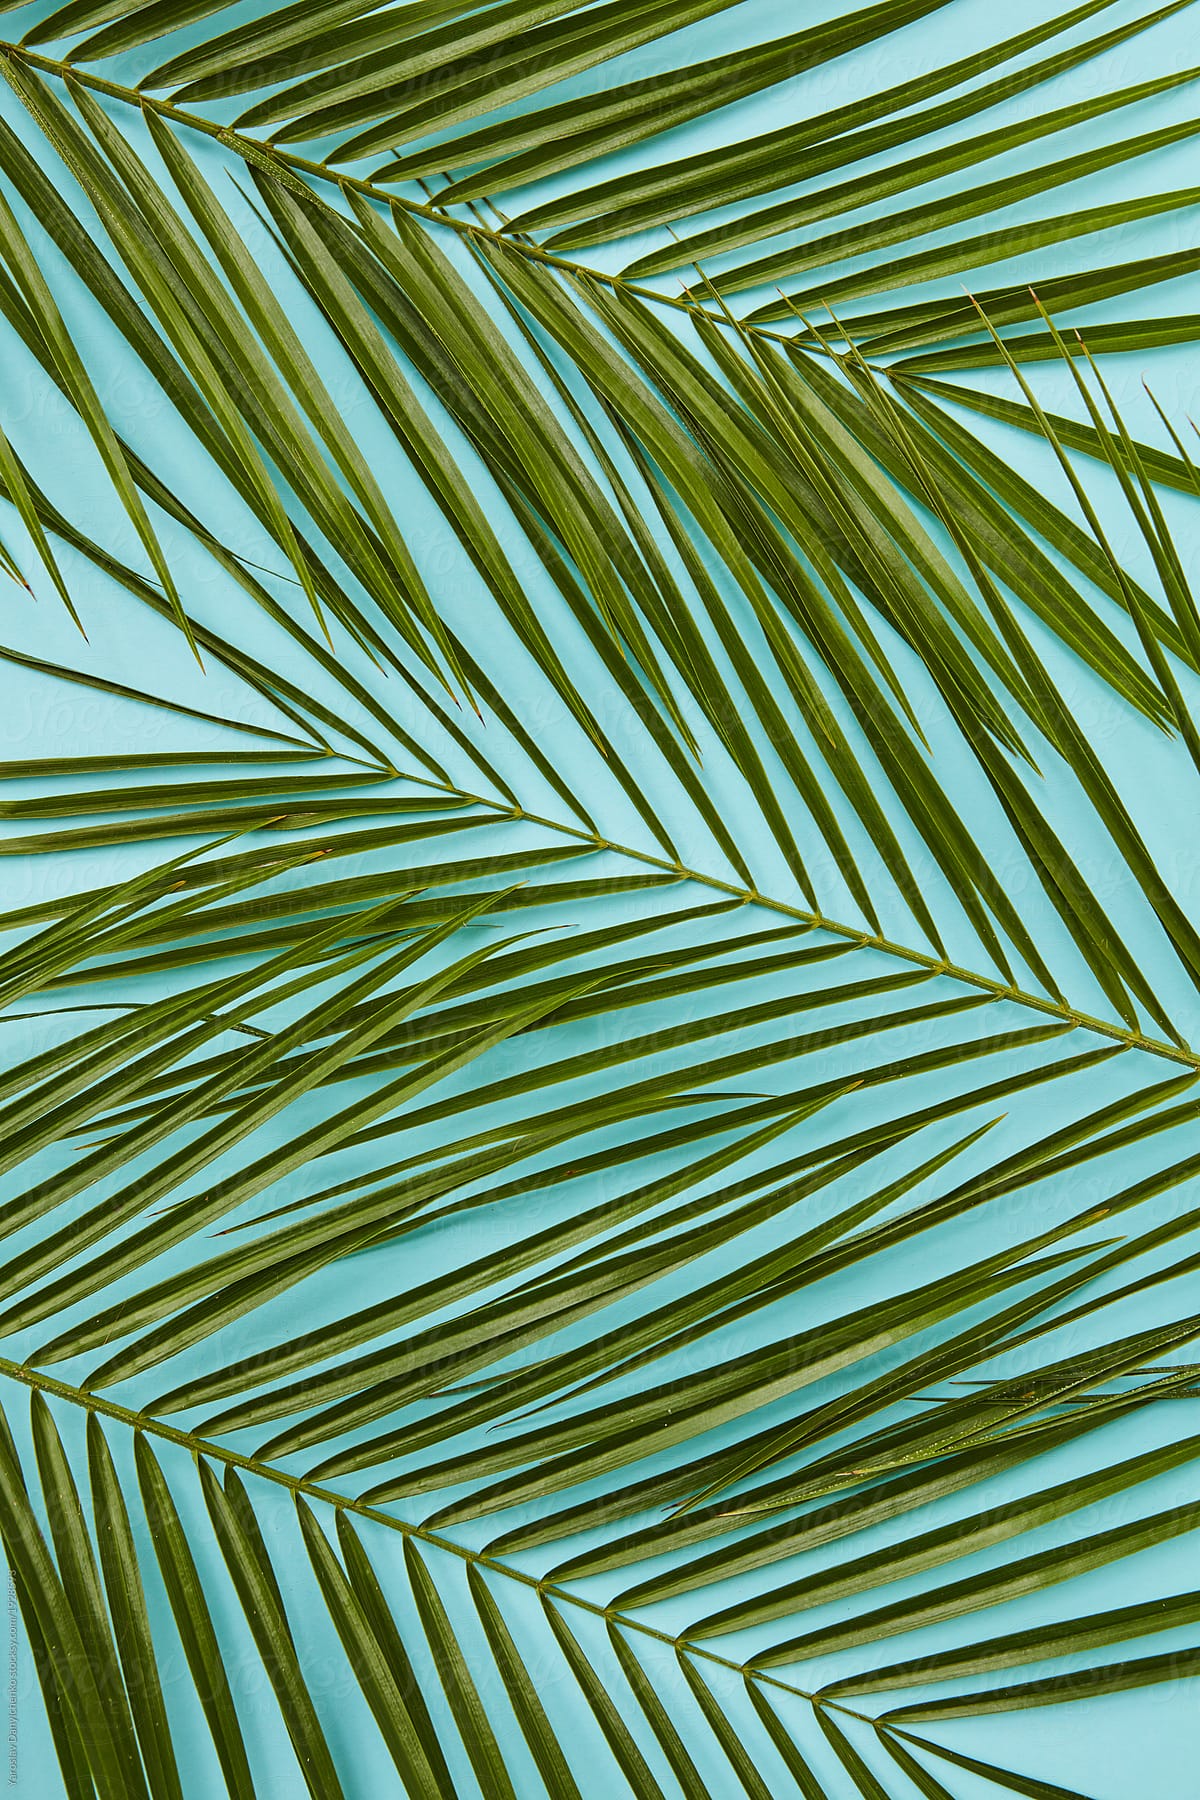 A pattern of green palm leaves